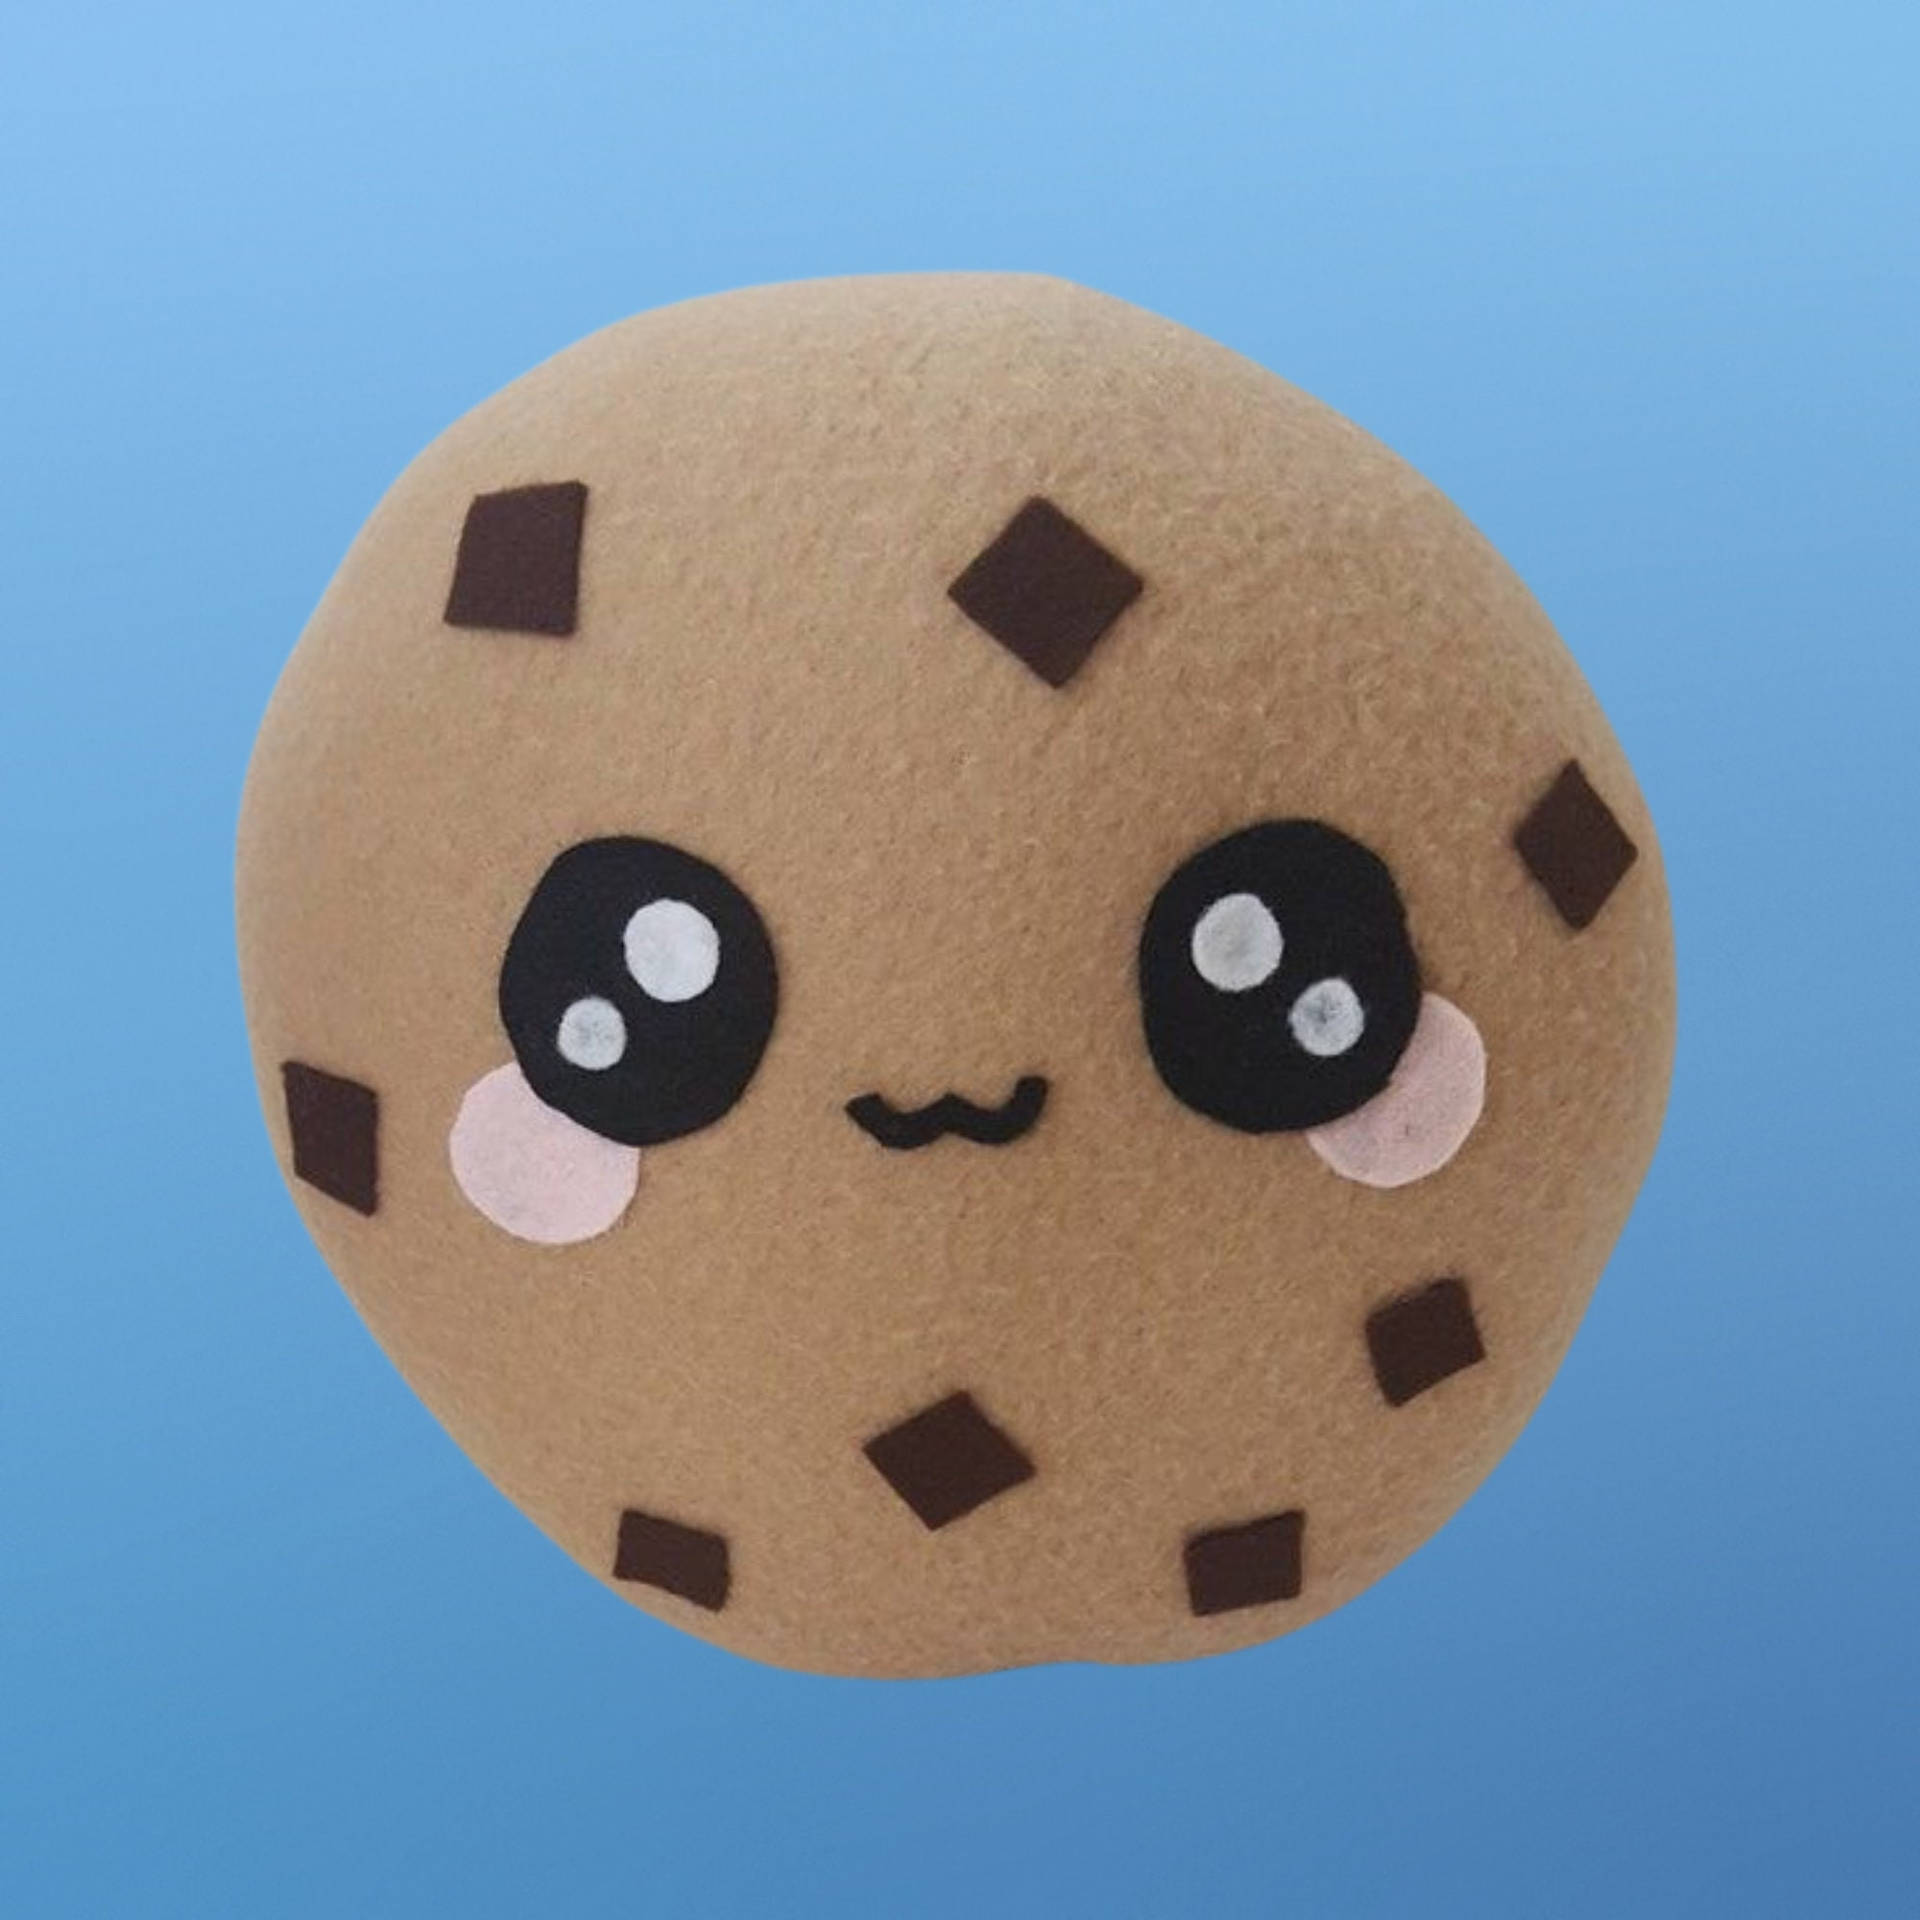 A tasty Cartoon Cookie that calls for a snack! Wallpaper